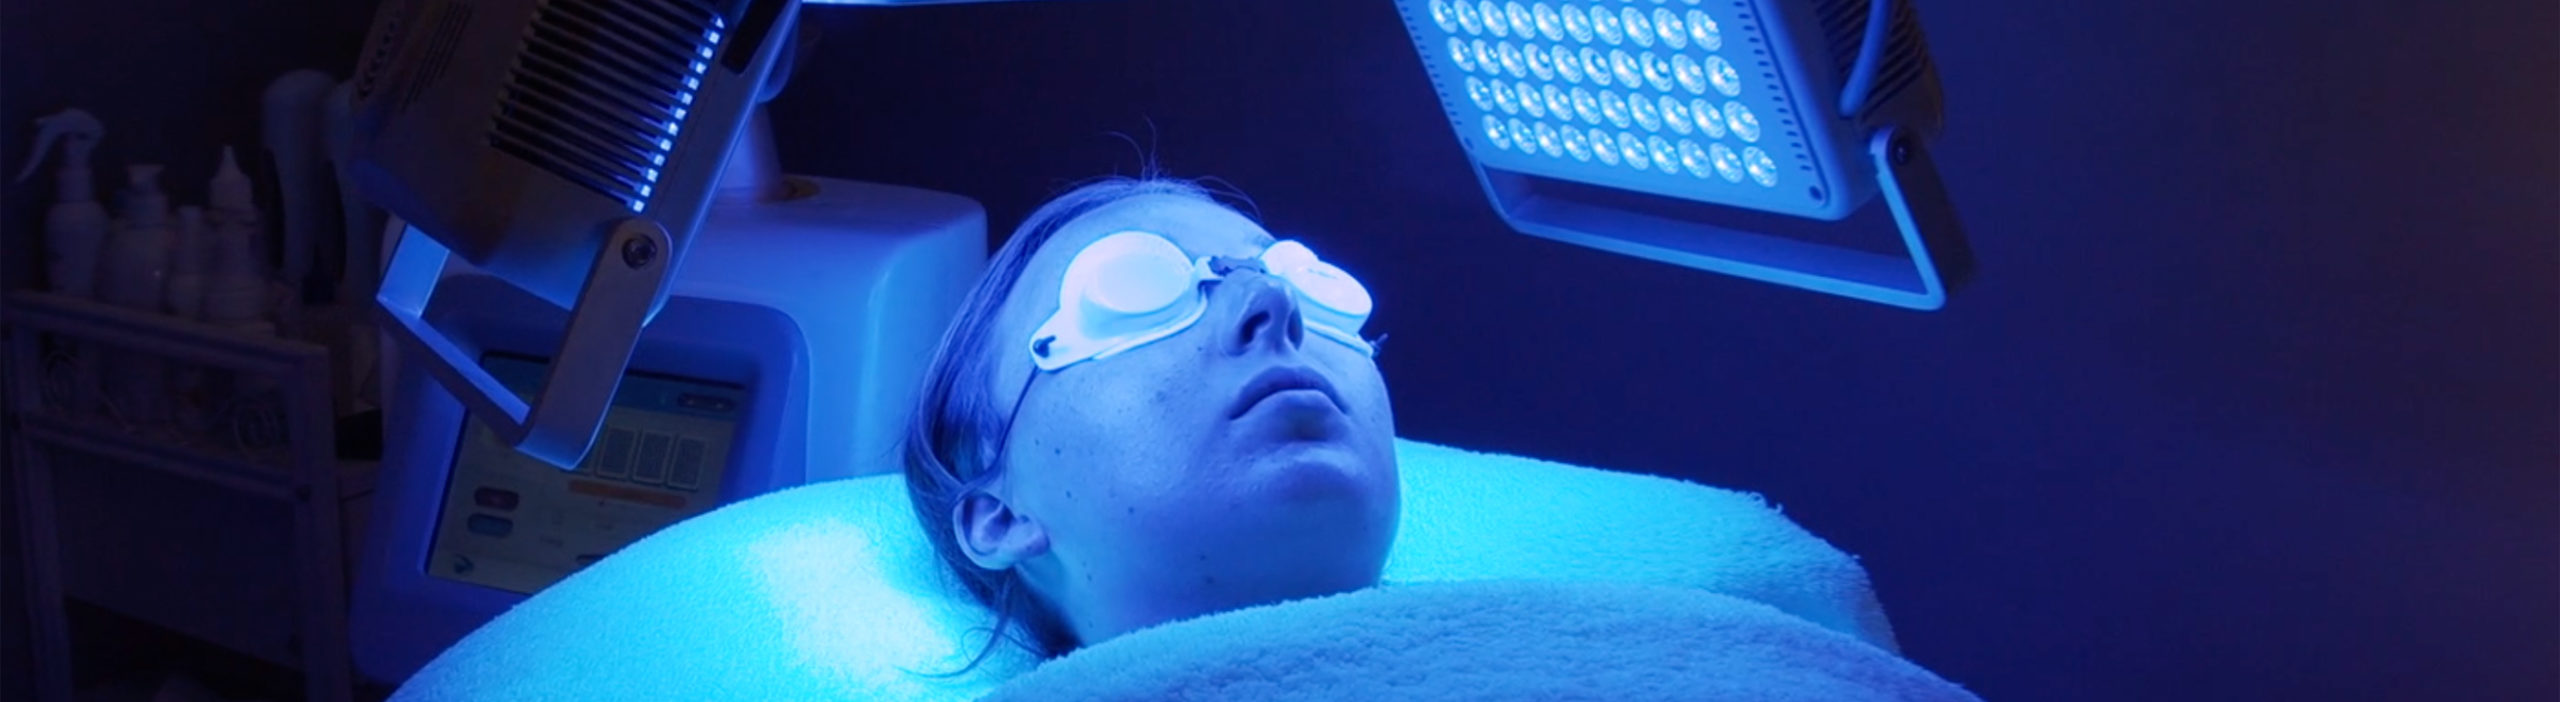 LED light therapy skin tightening treatment at Le Plaisir, Kaiapoi